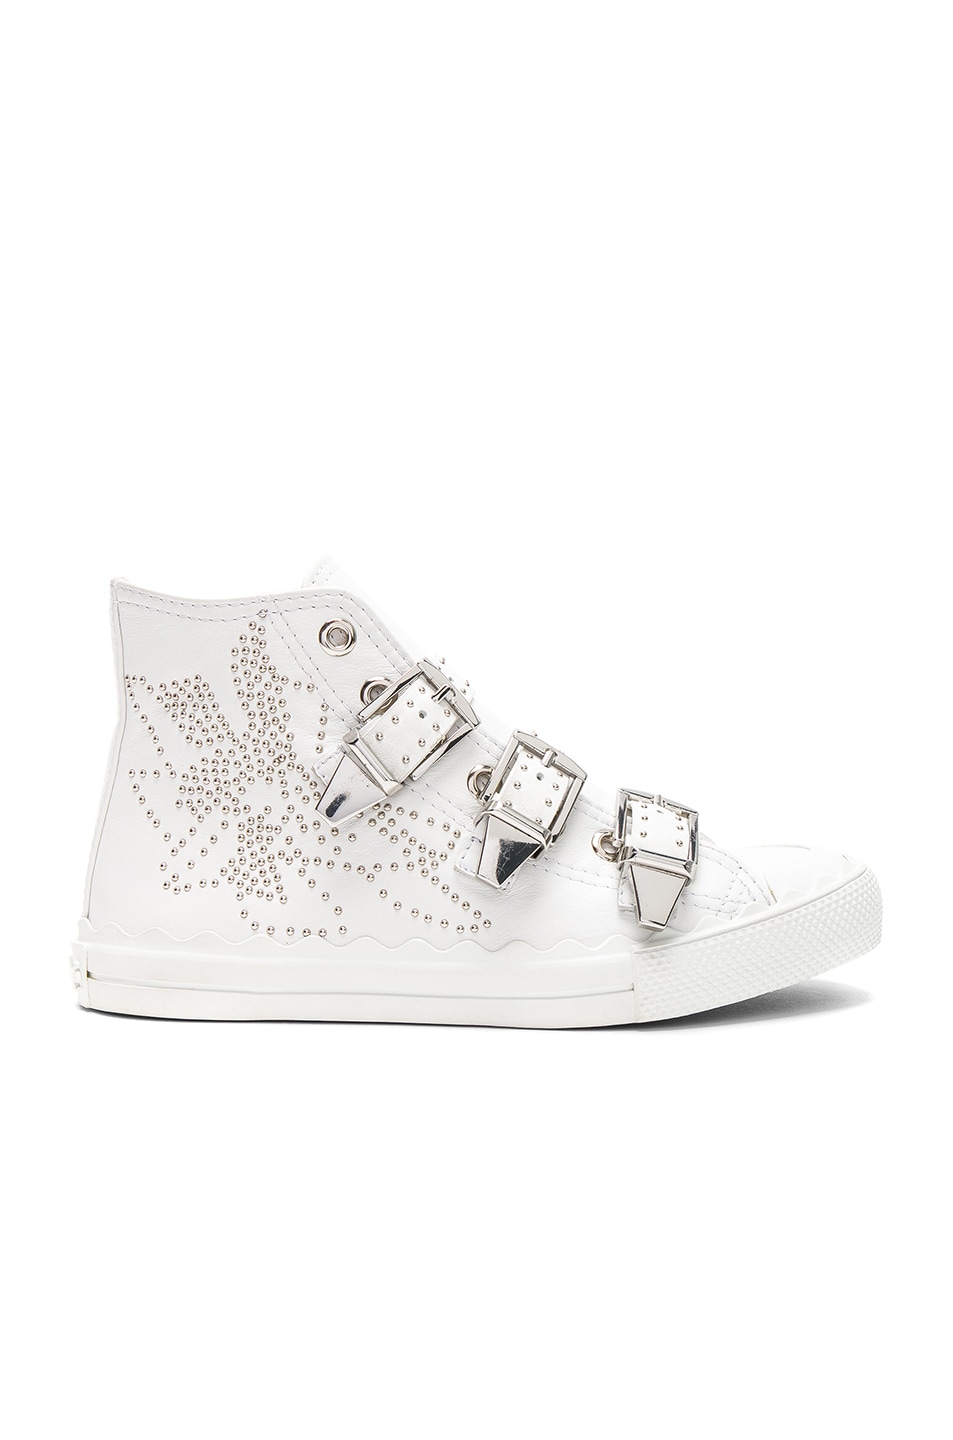 Image 1 of Chloe Kyle Semi-Shiny Calf Leather Buckle Sneakers in White